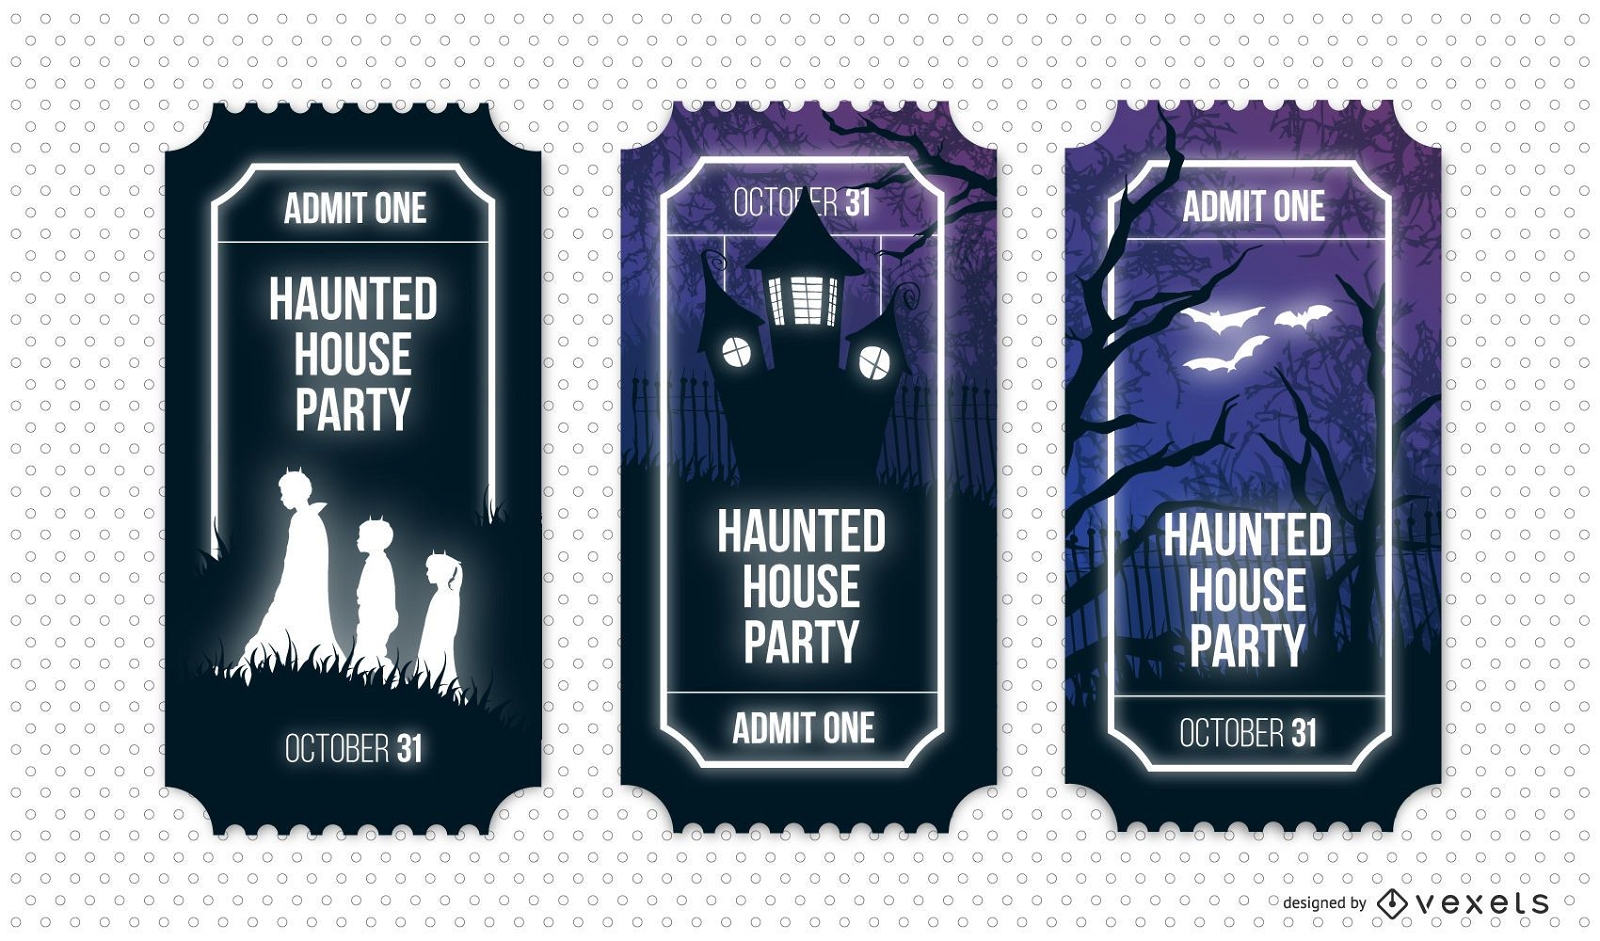 Haunted house party ticket set